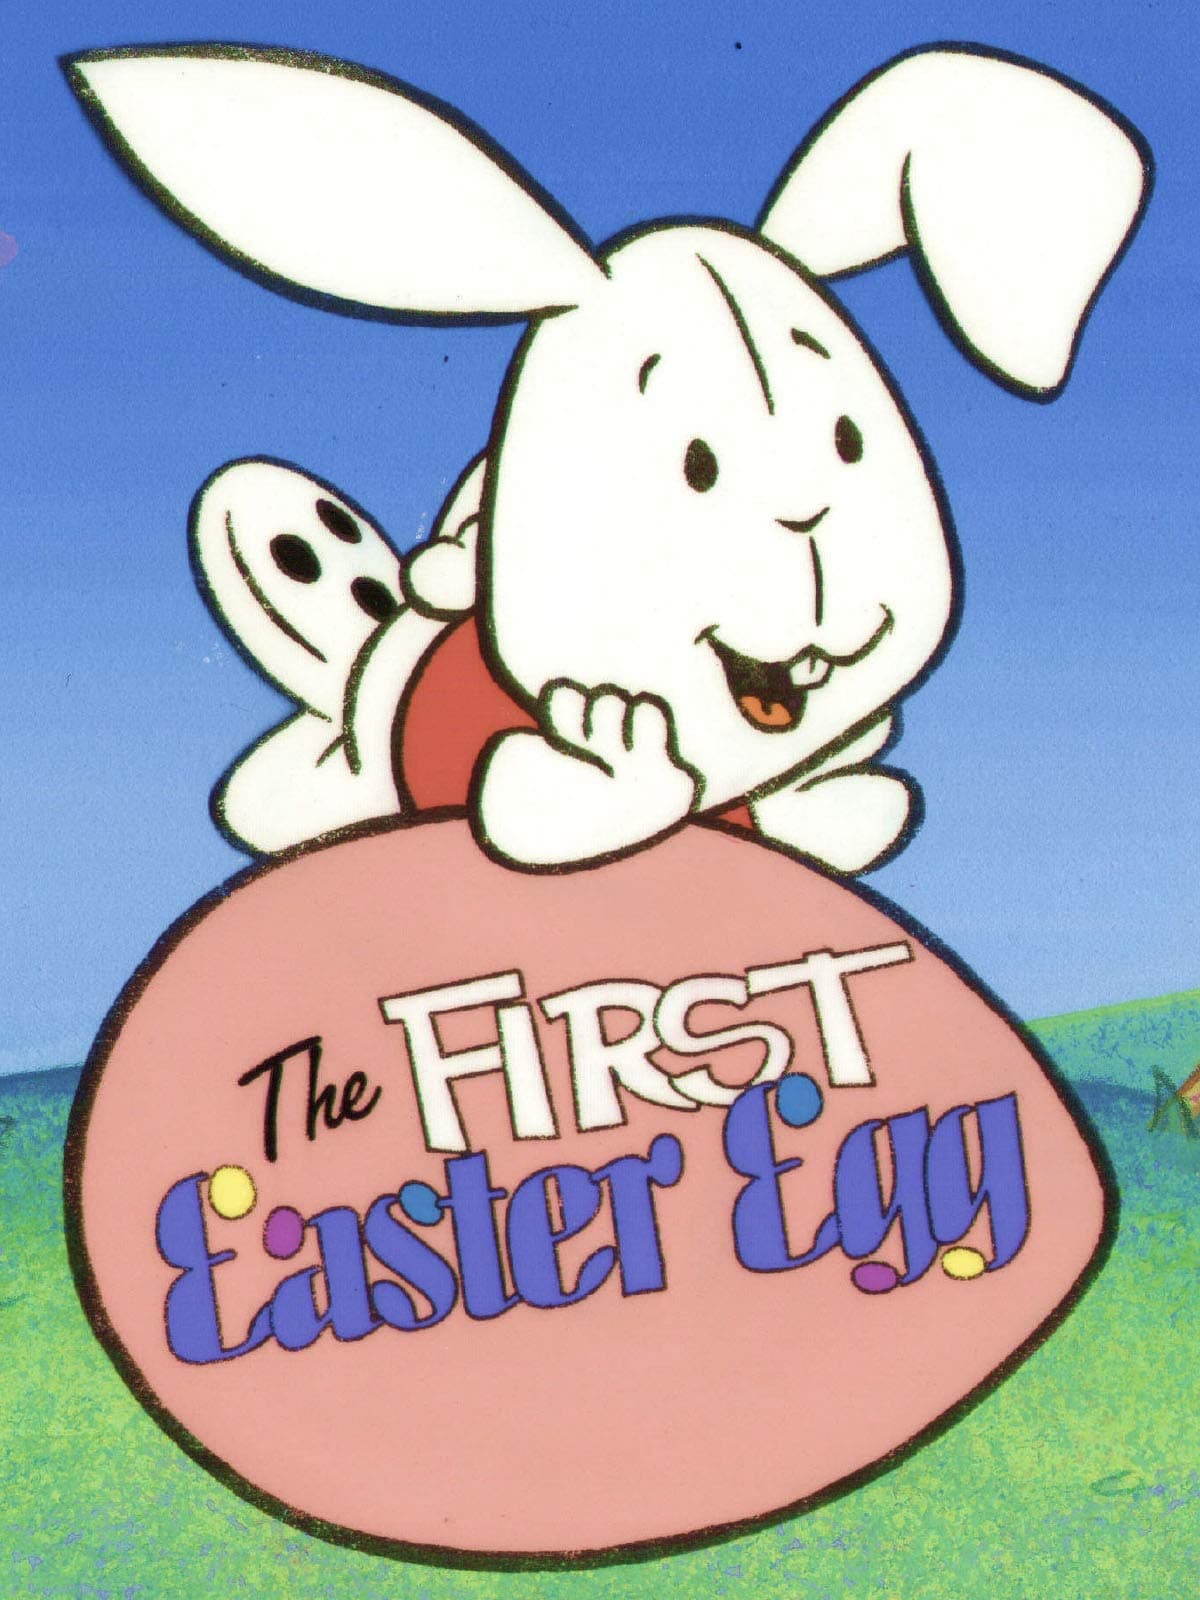 The First Easter Egg